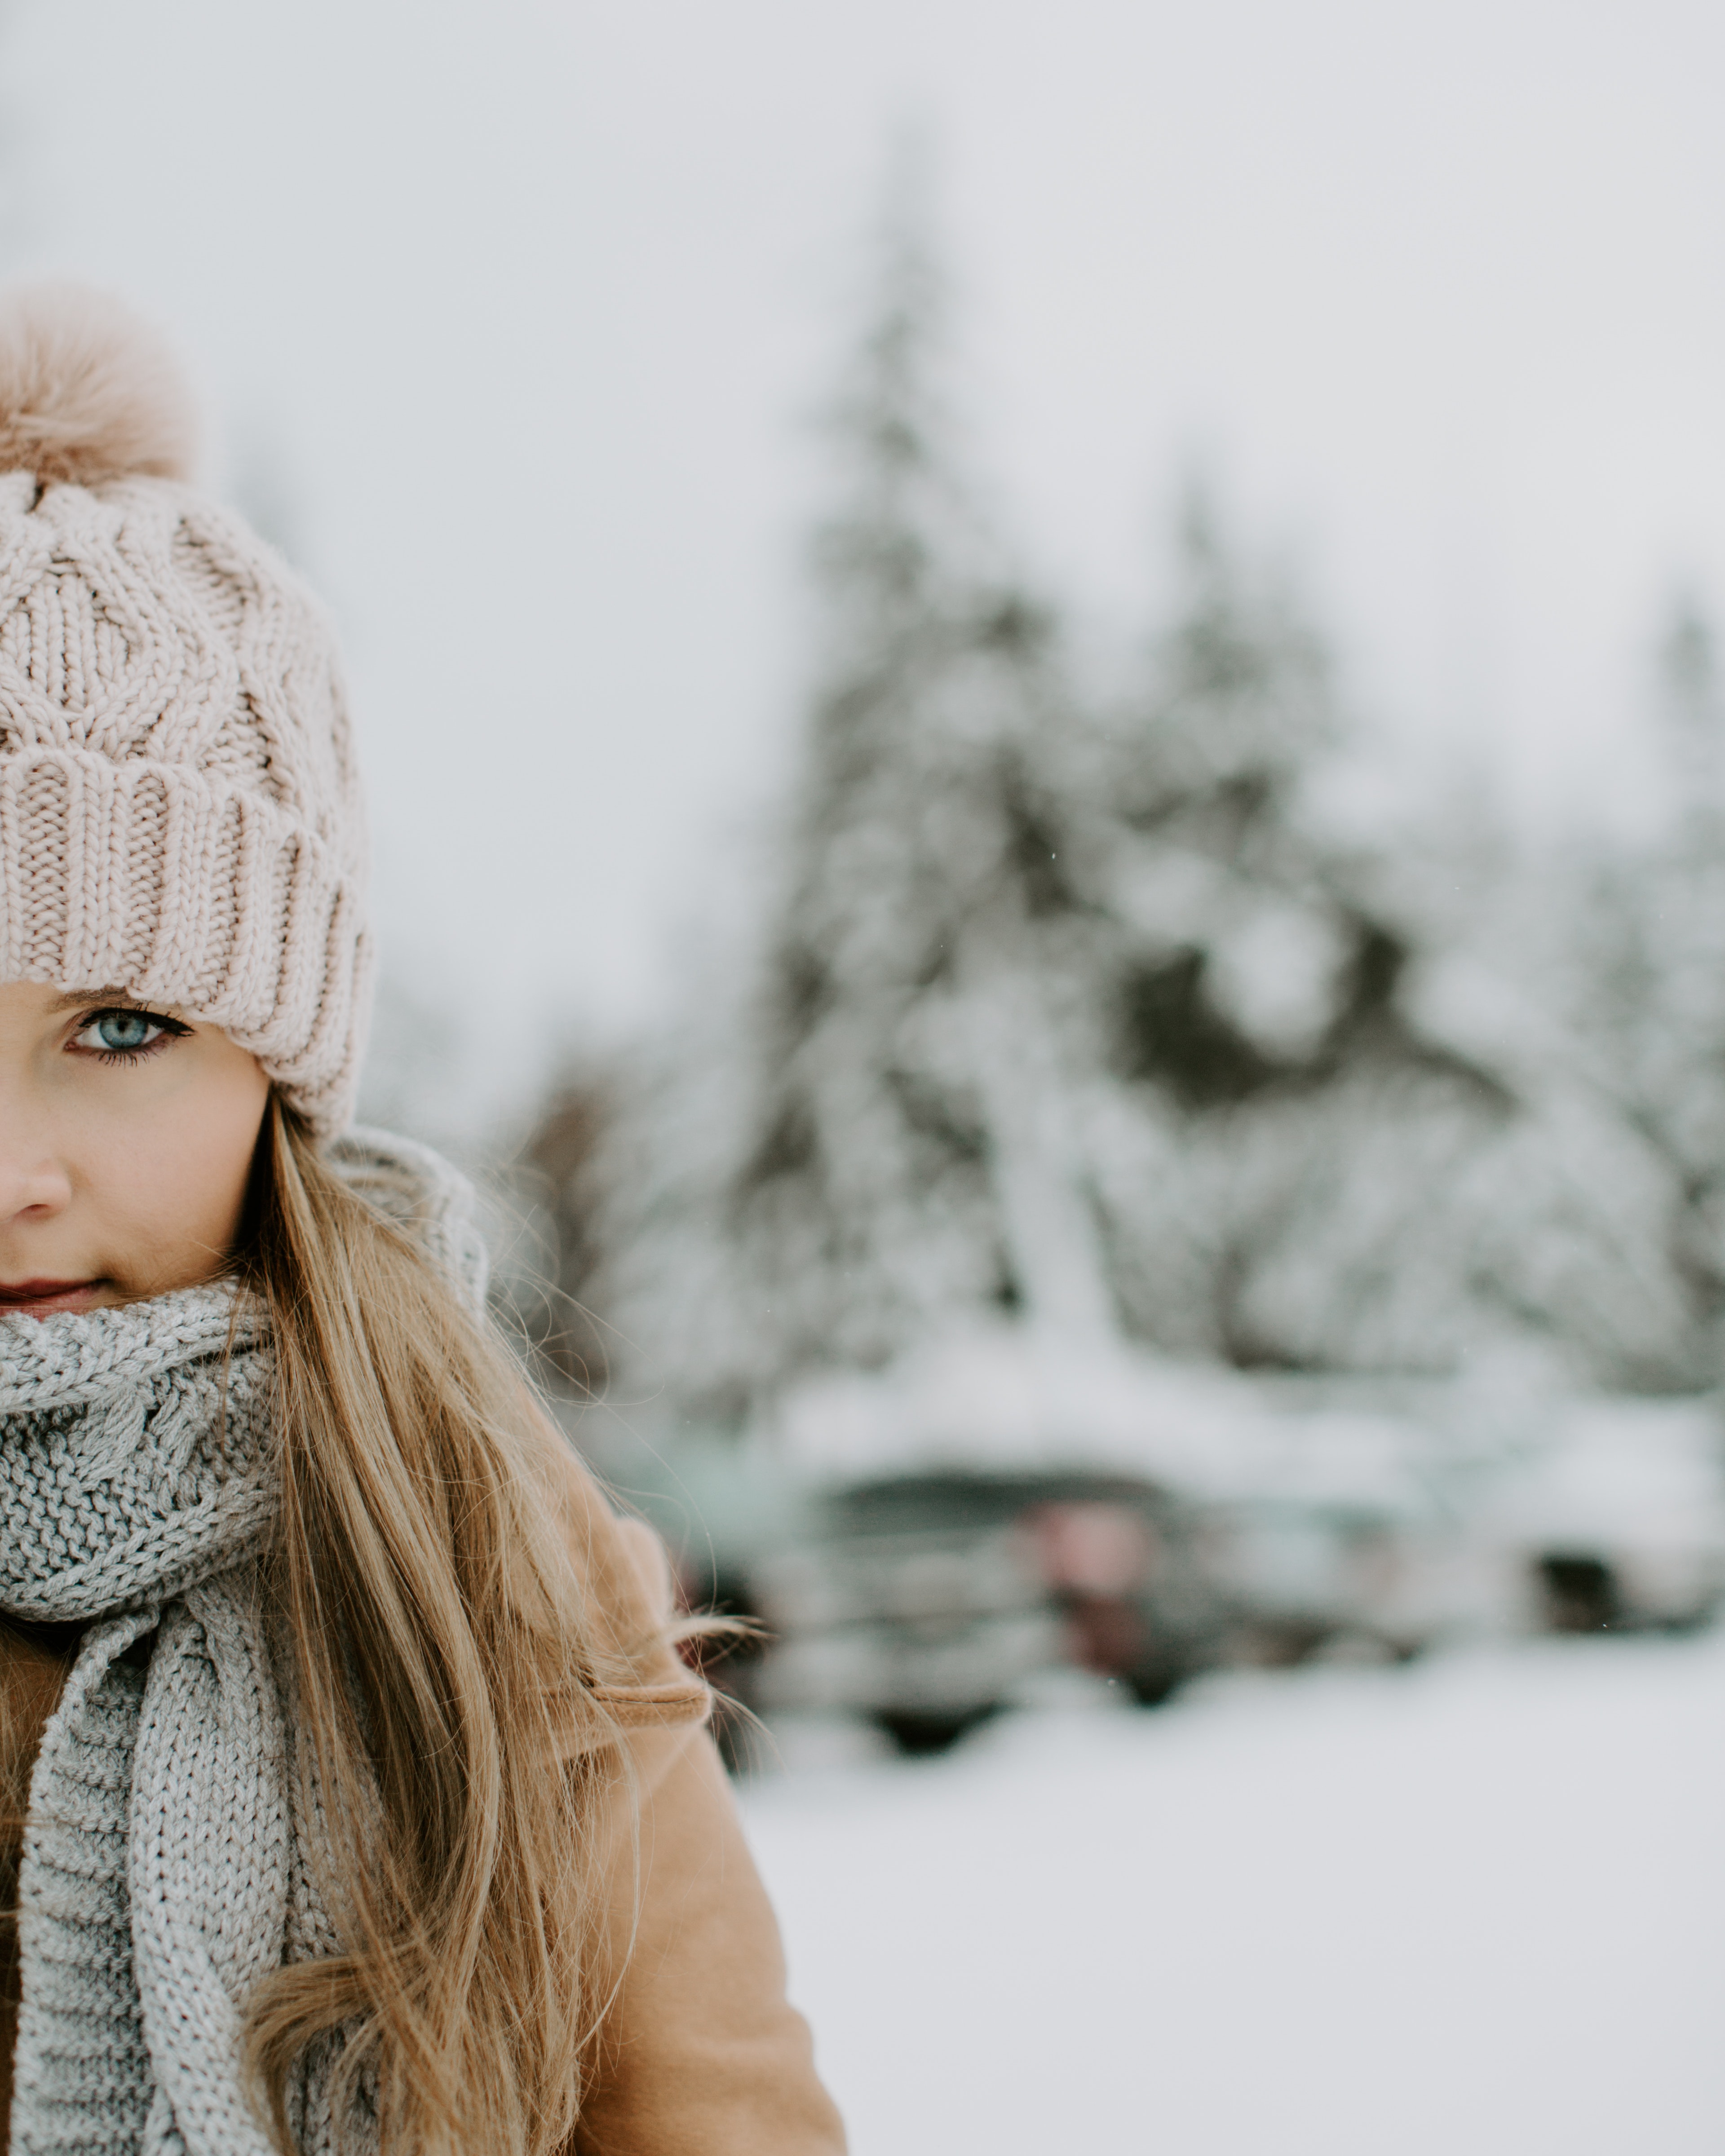 Girl wearing winter outfit on snowy field photo